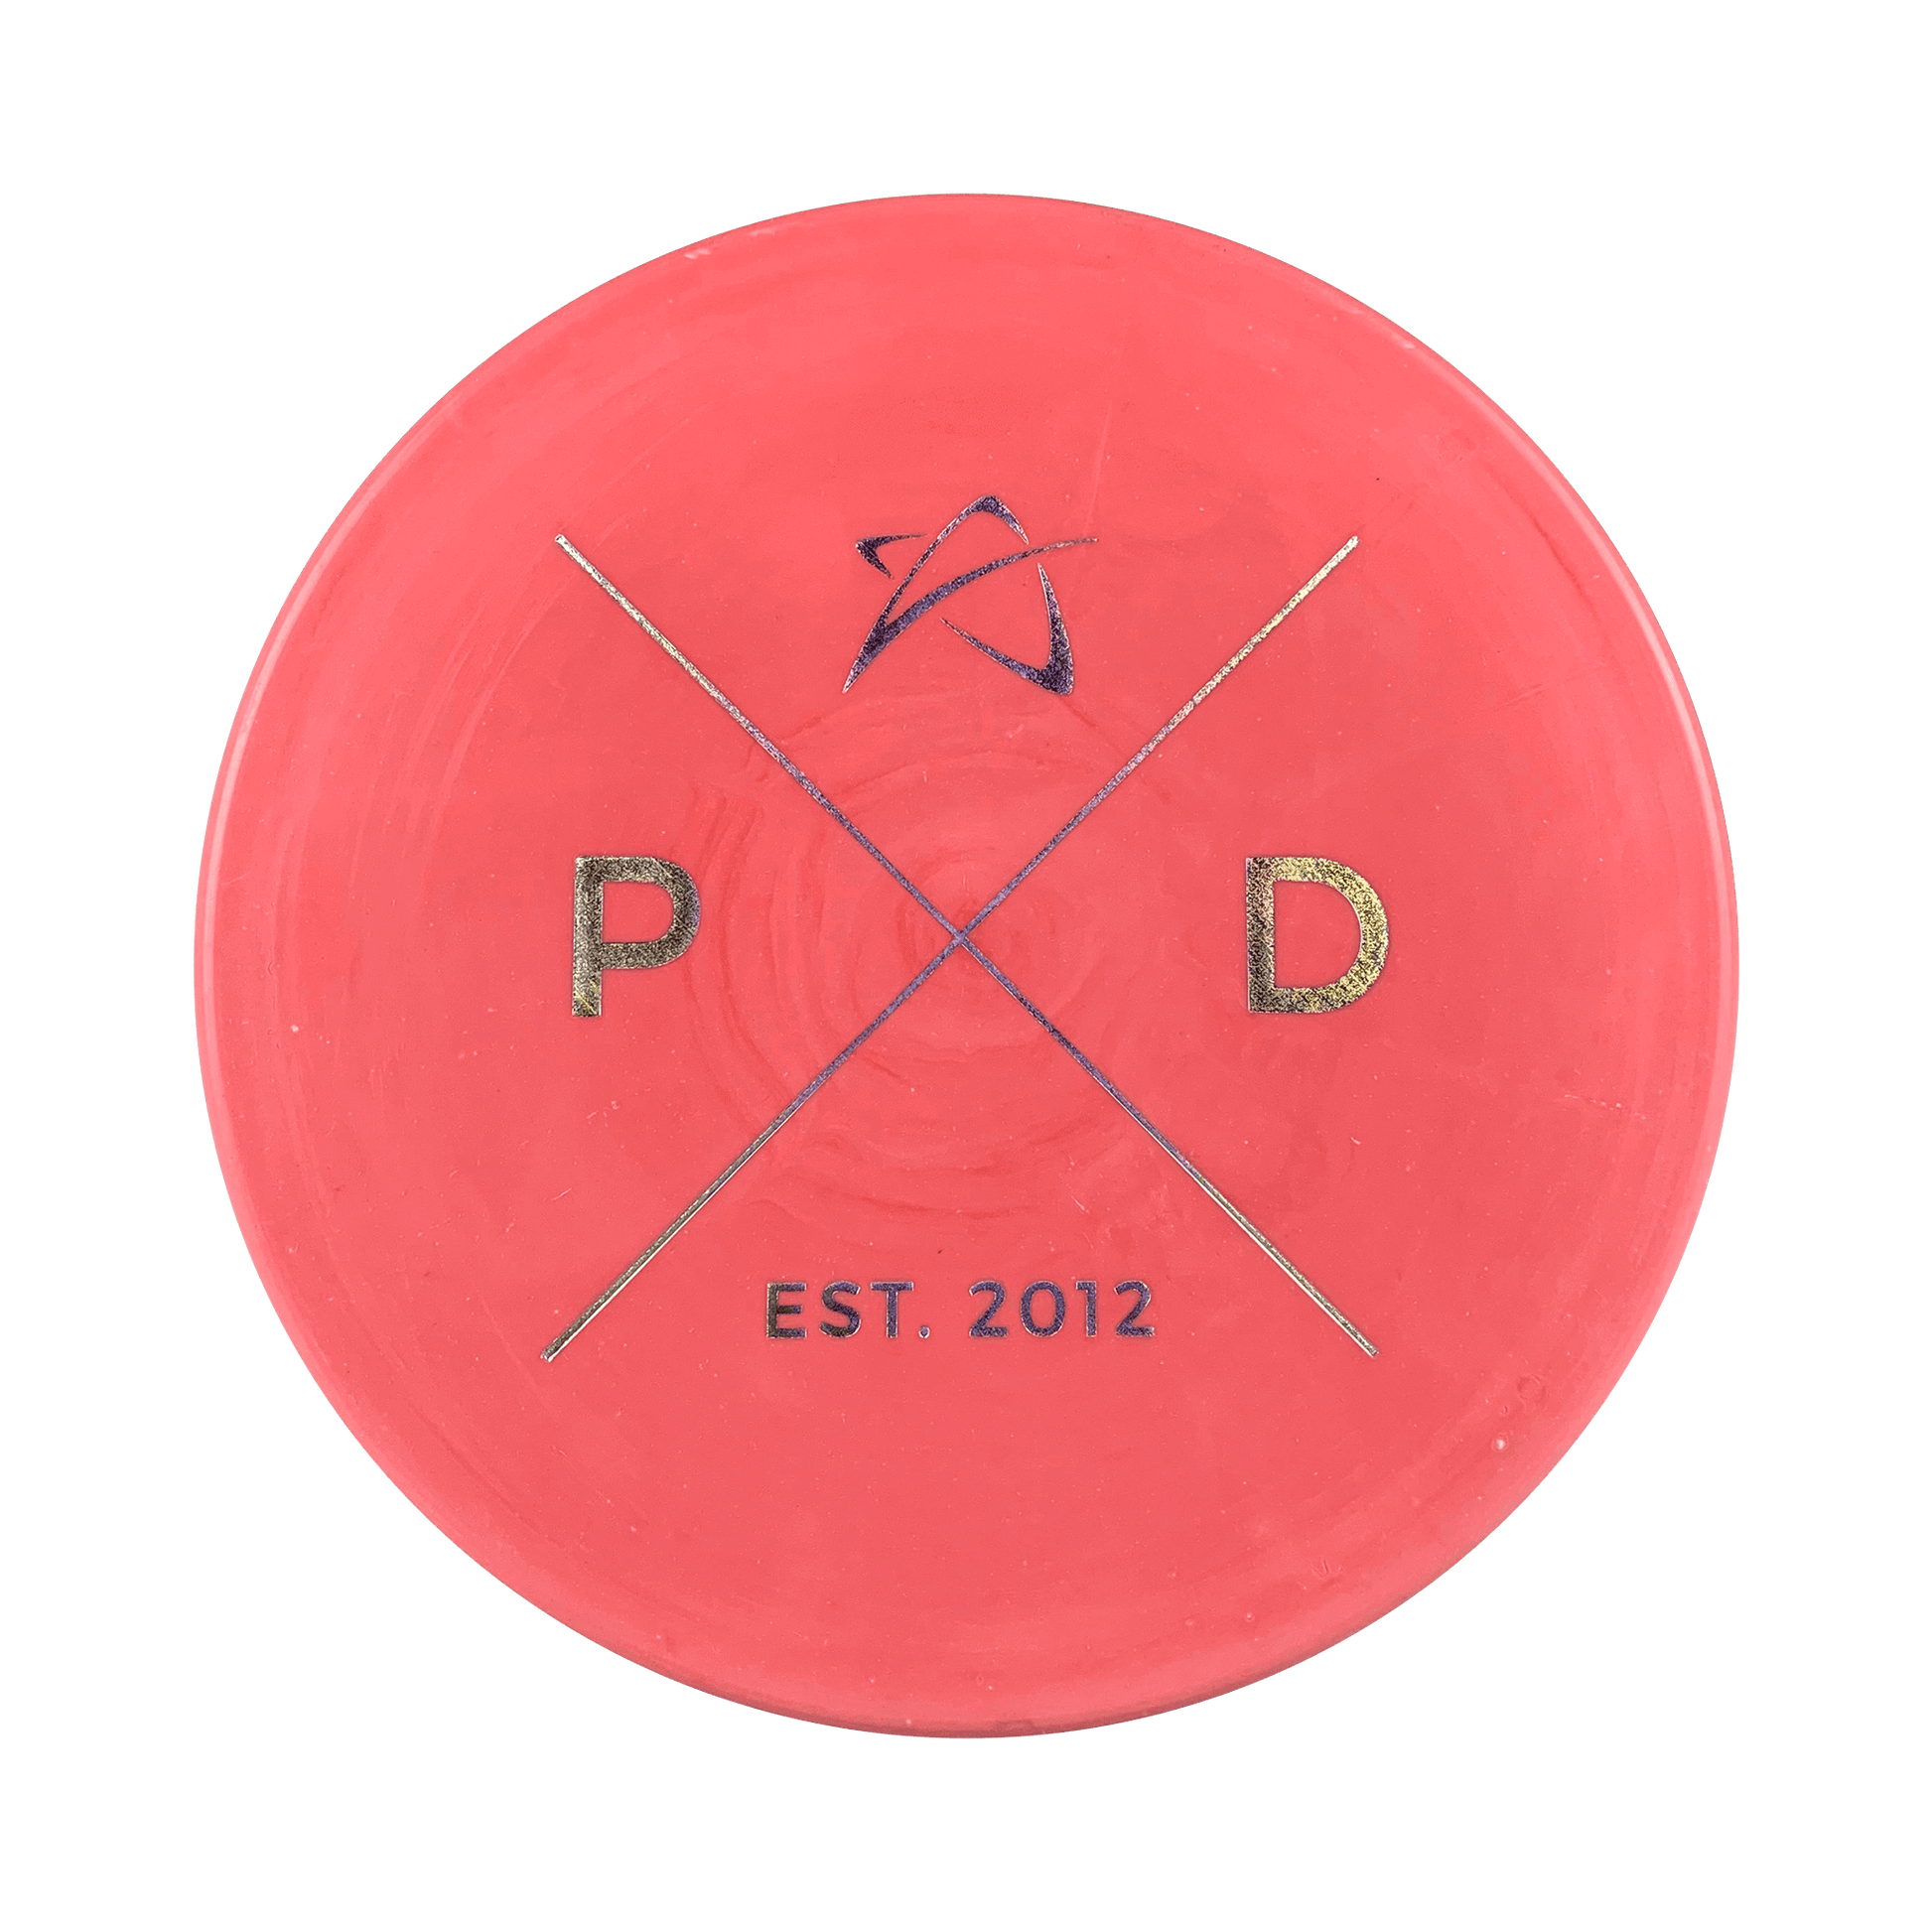 300 A1 Disc Prodigy light red 170 